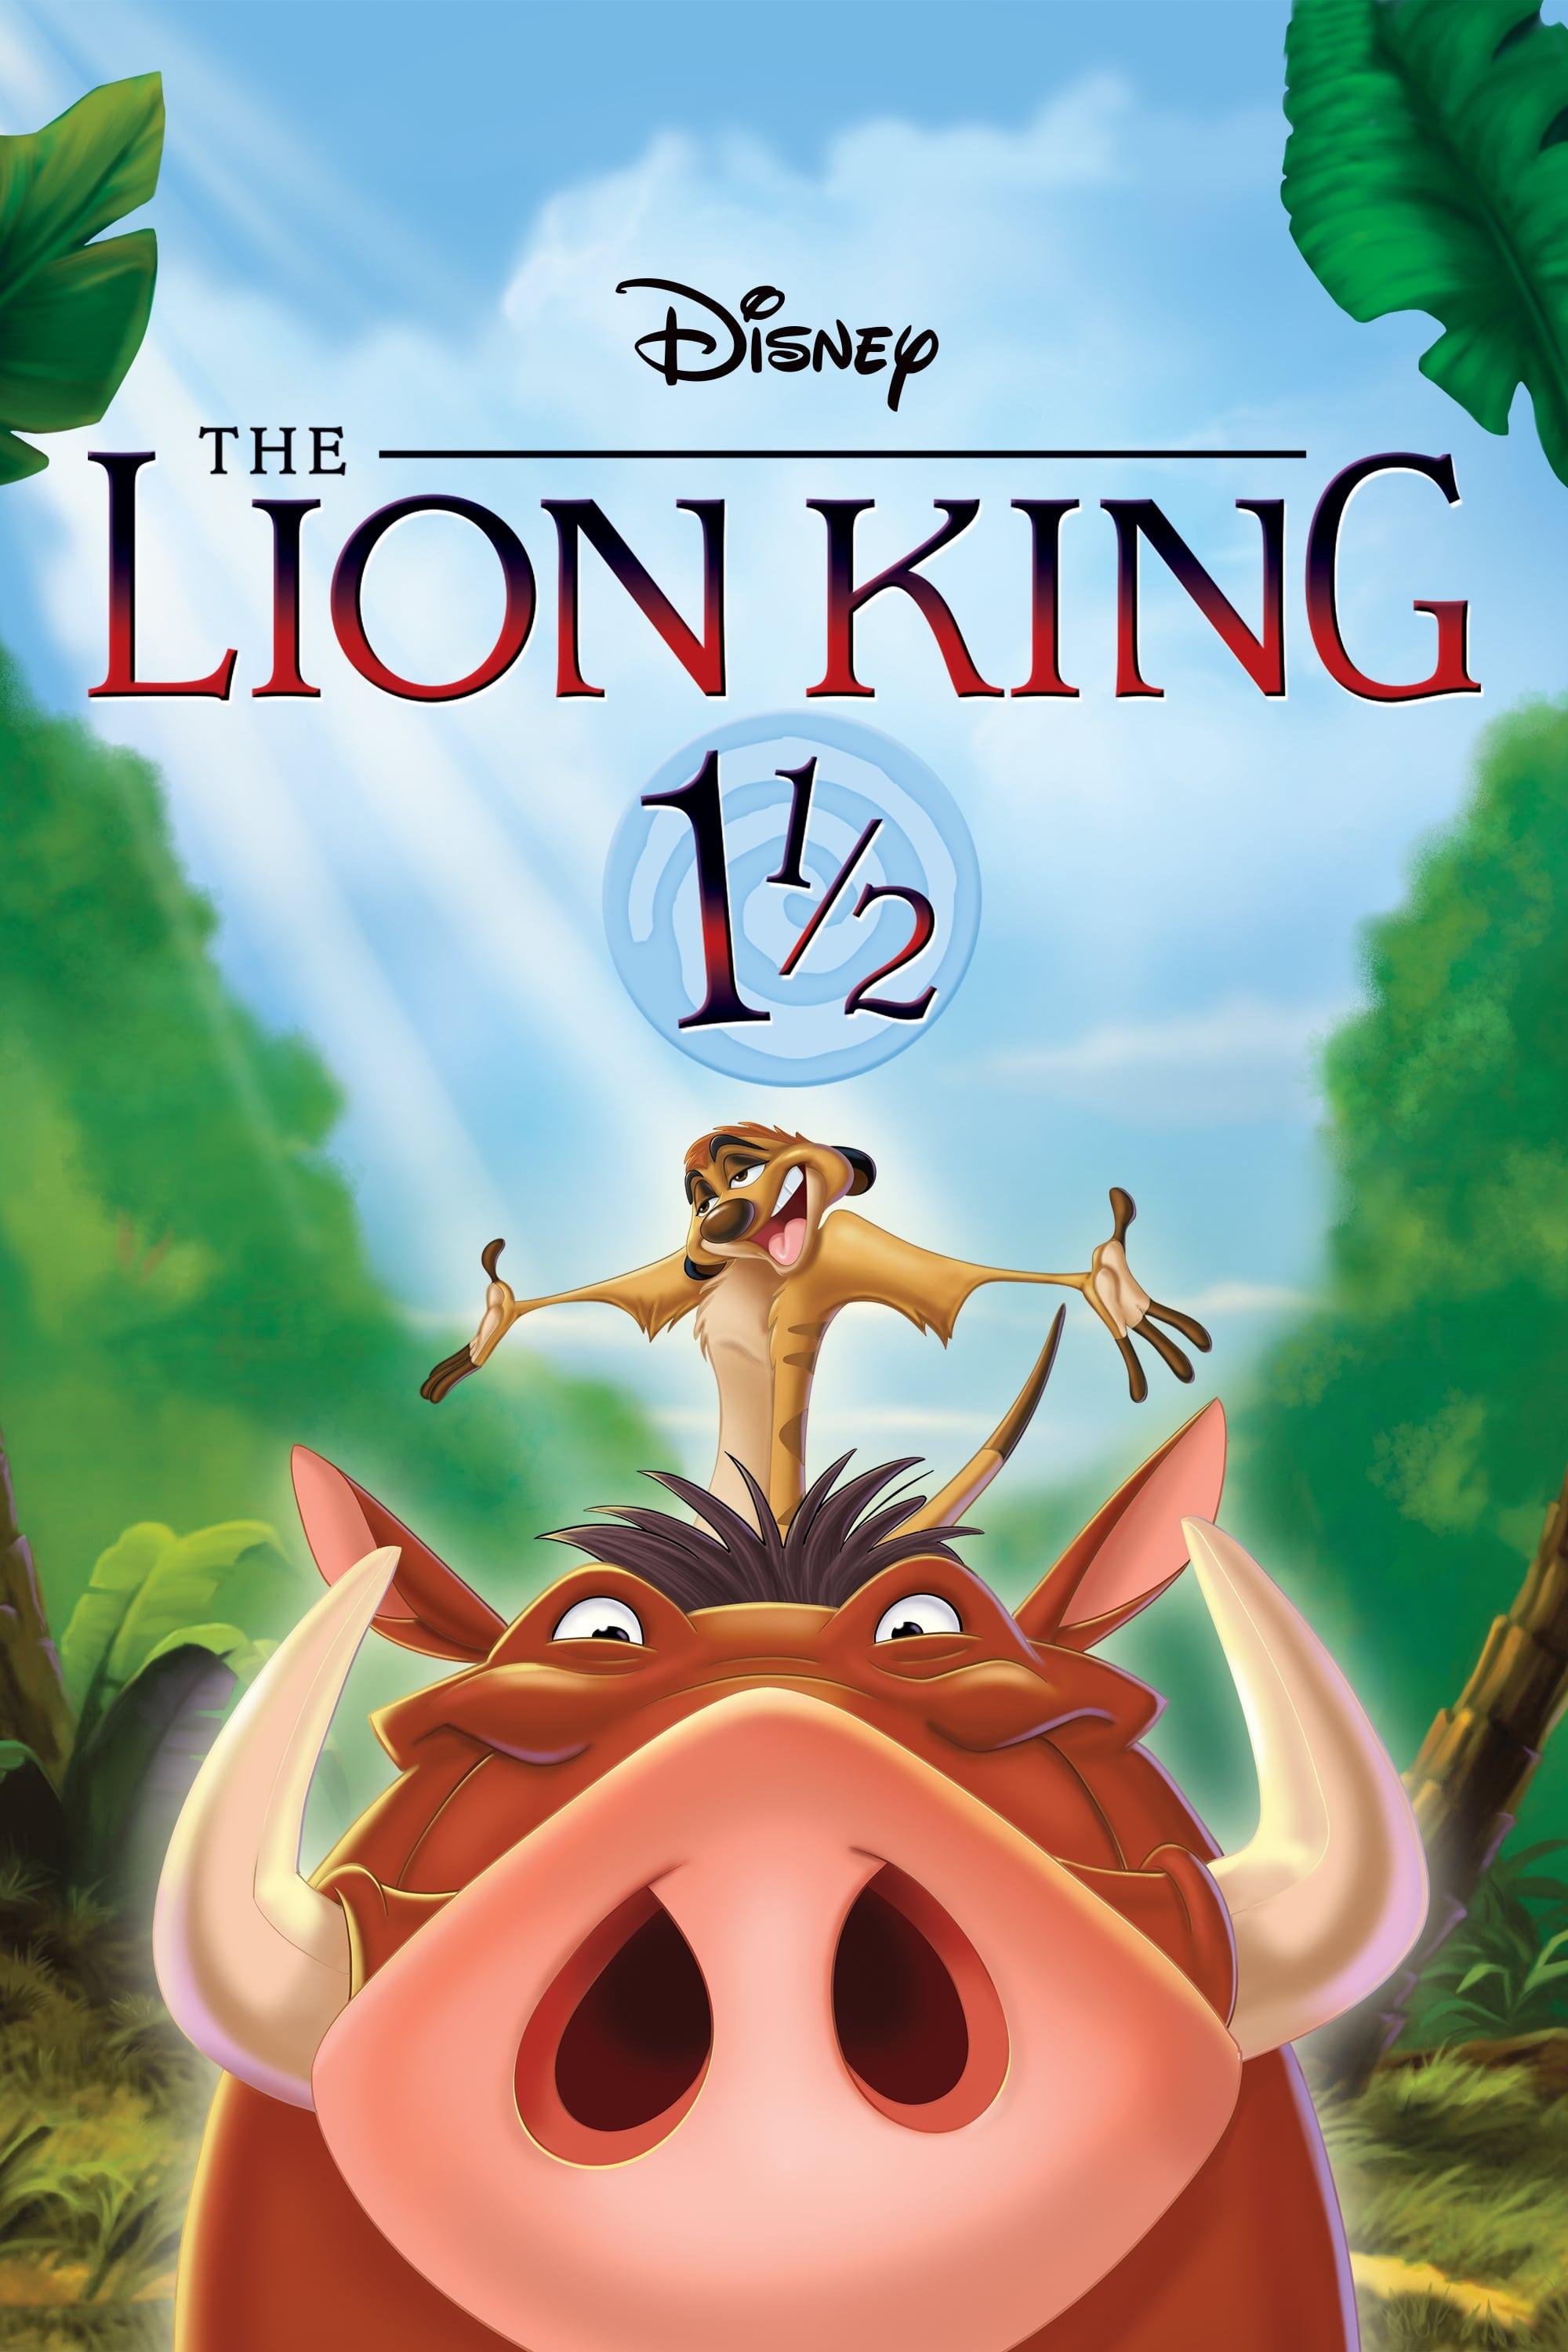 The Lion King 1½ poster